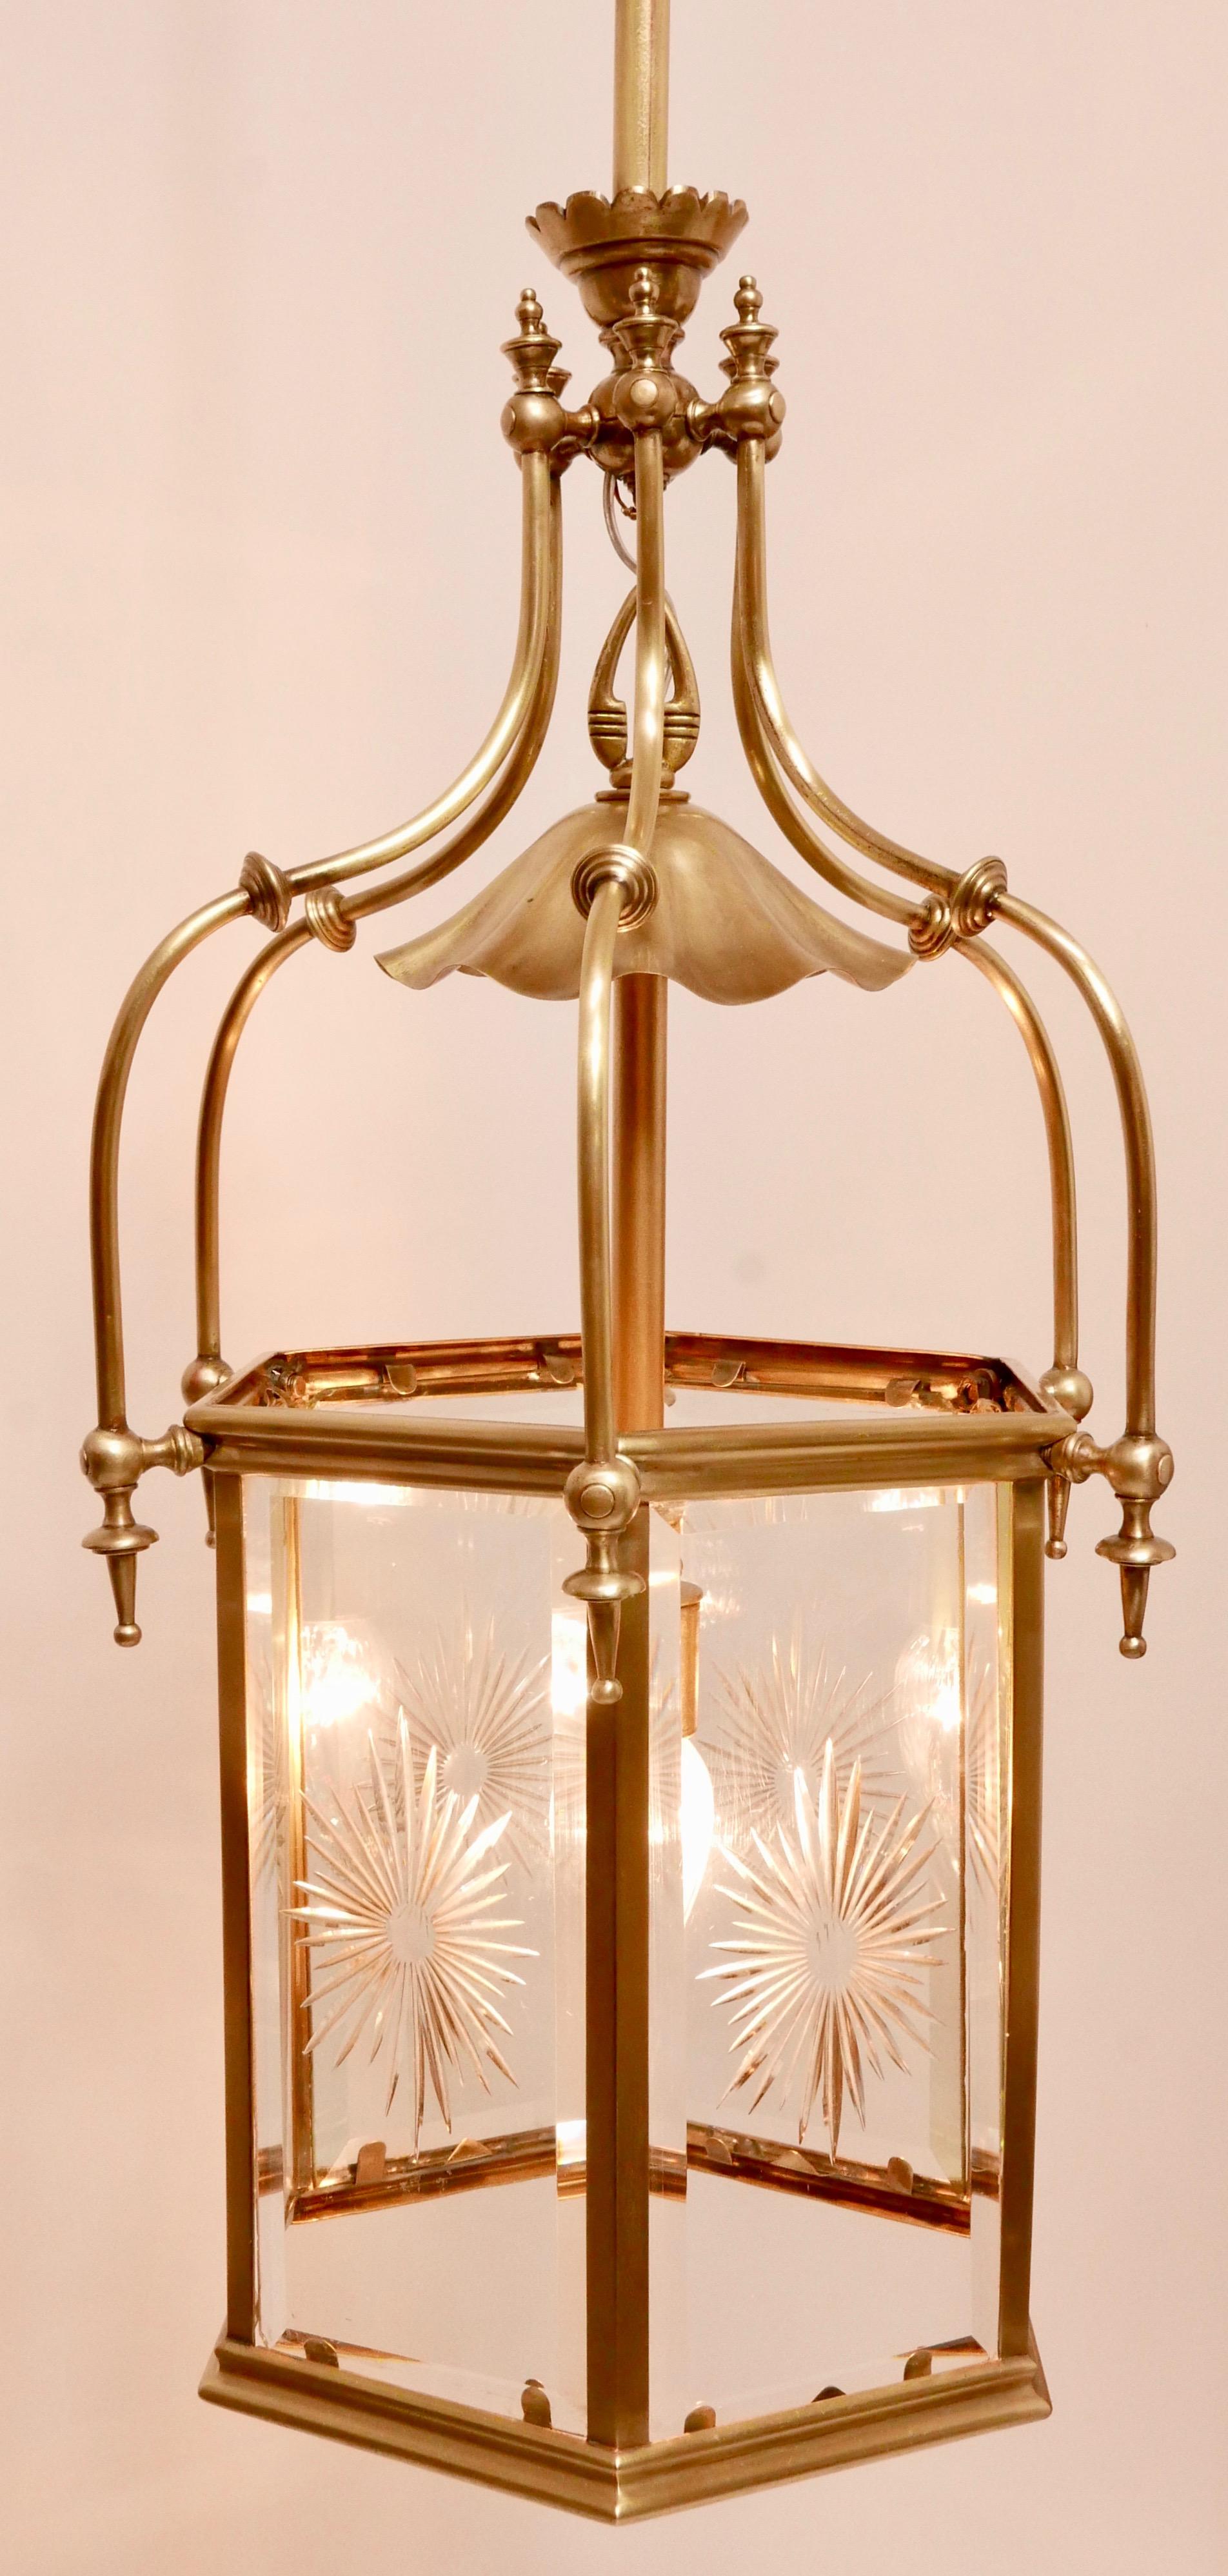 Exceptional 19th Century Brass & Cut Glass Hexagon Shaped Entry or Hall Lantern For Sale 7